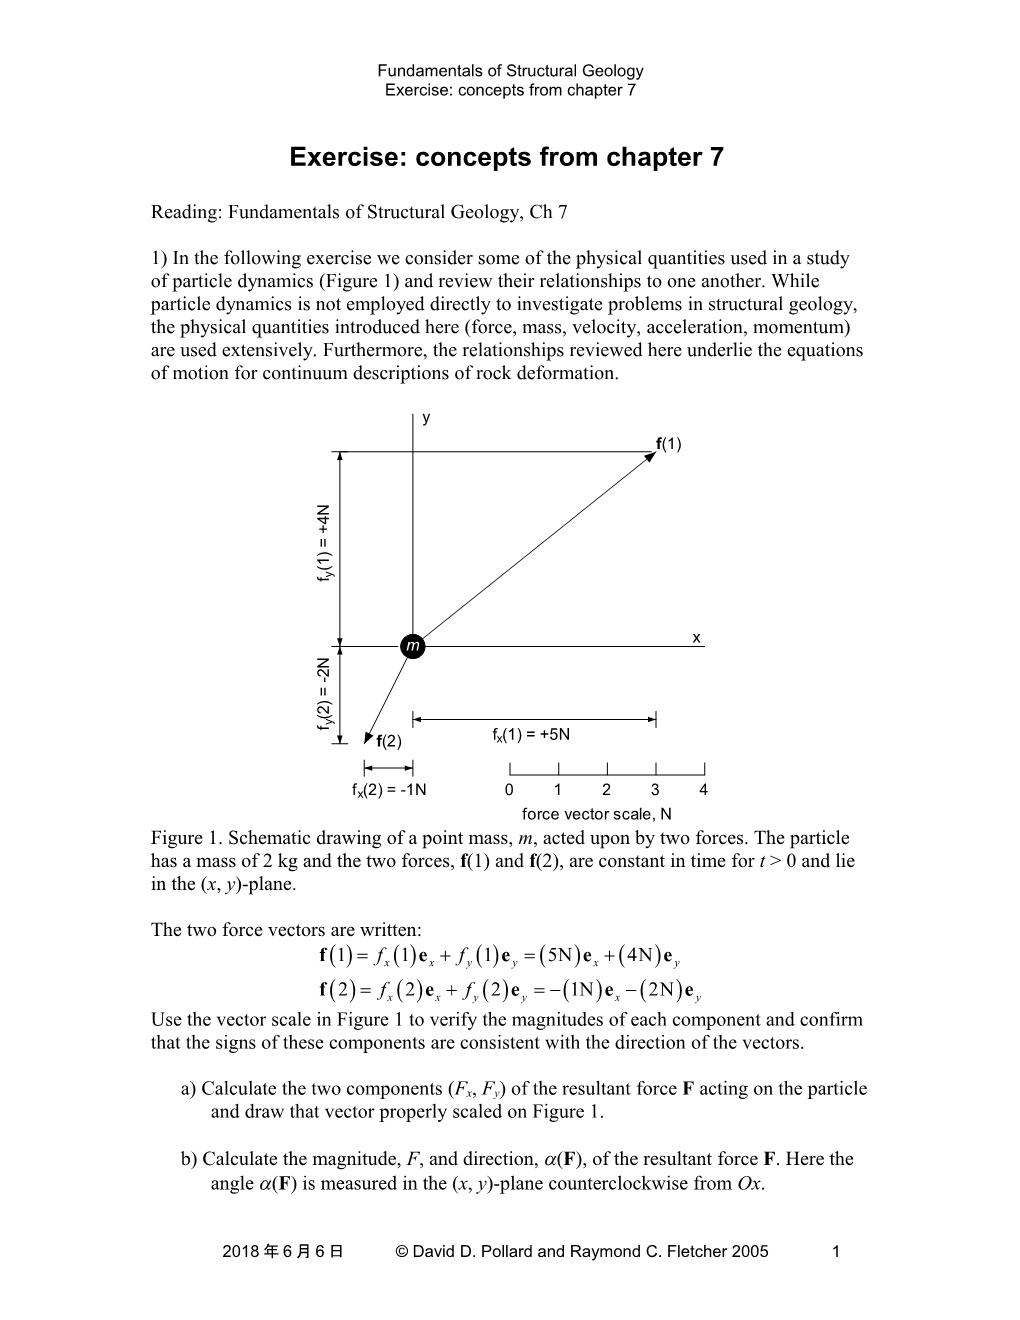 Exercise: Concepts from Chapter 7